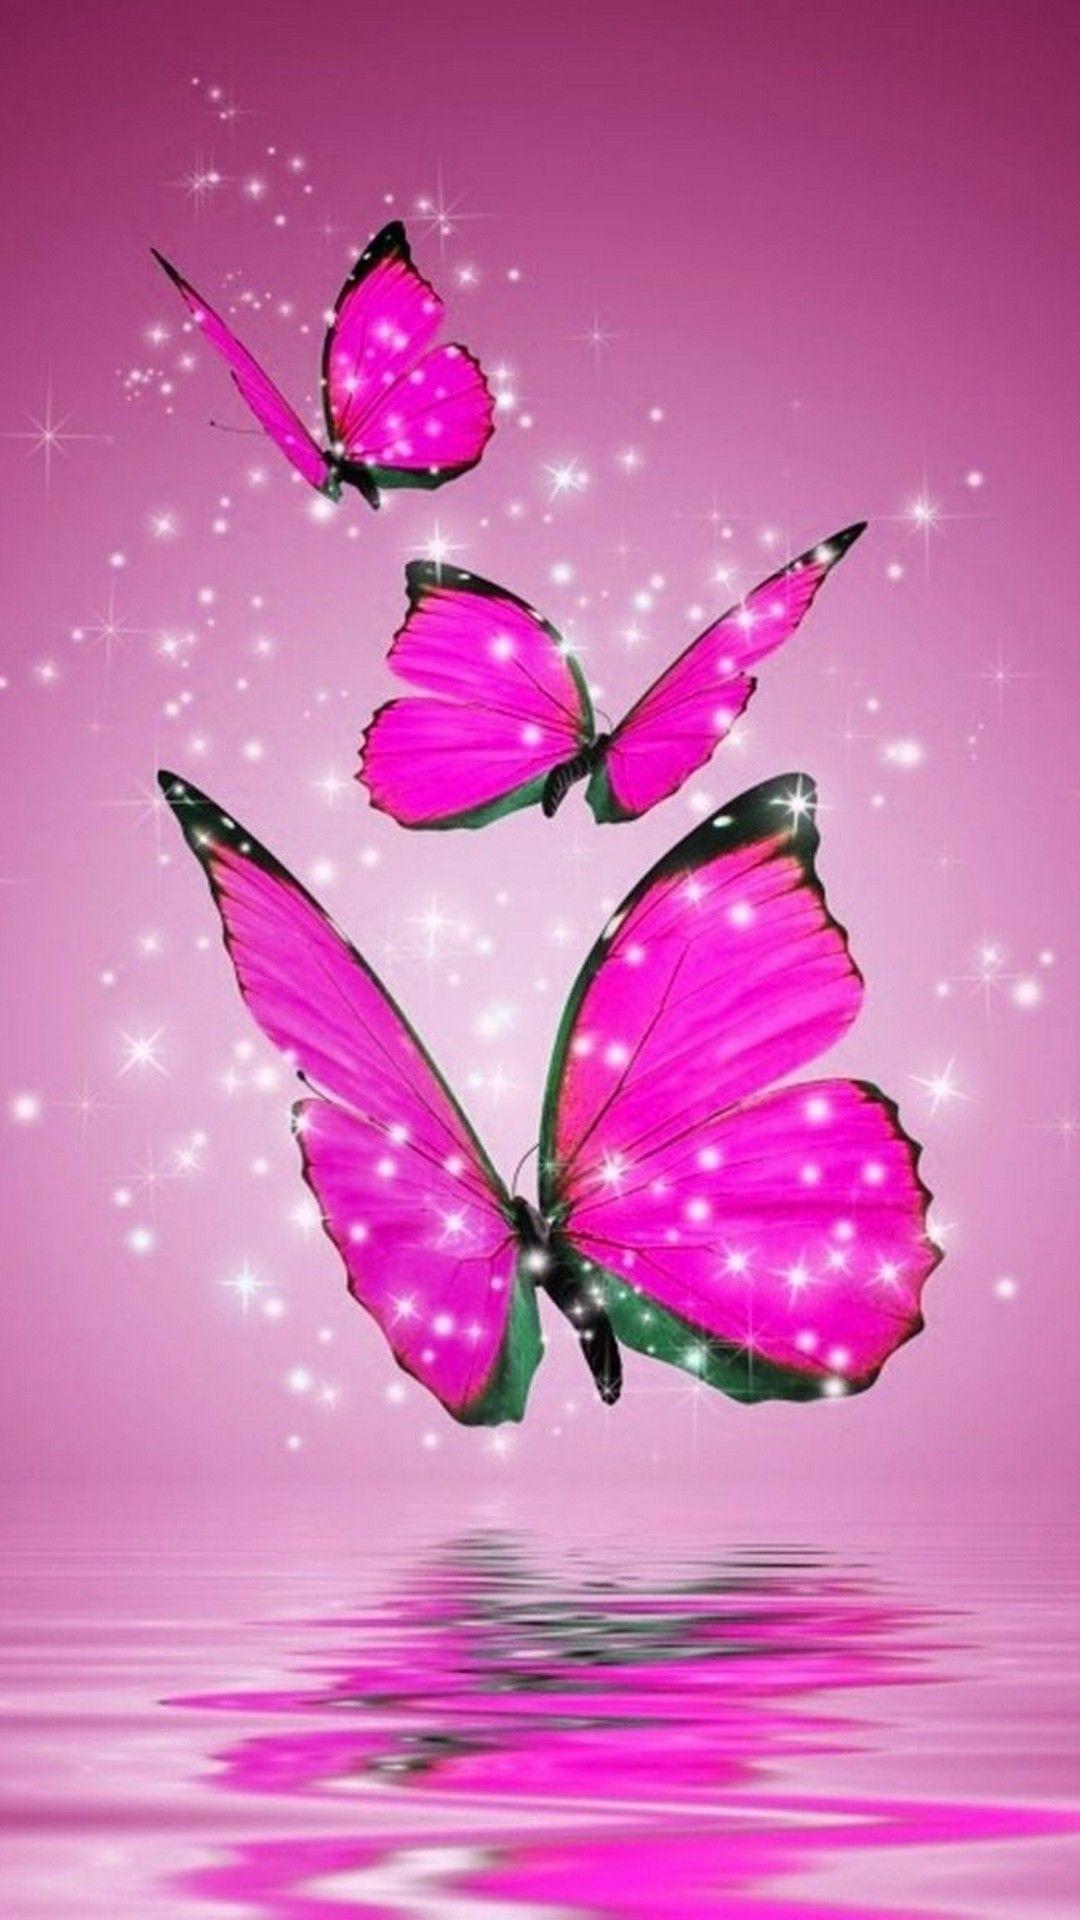 Pink Butterfly HD Wallpaper For Android. Butterfly wallpaper